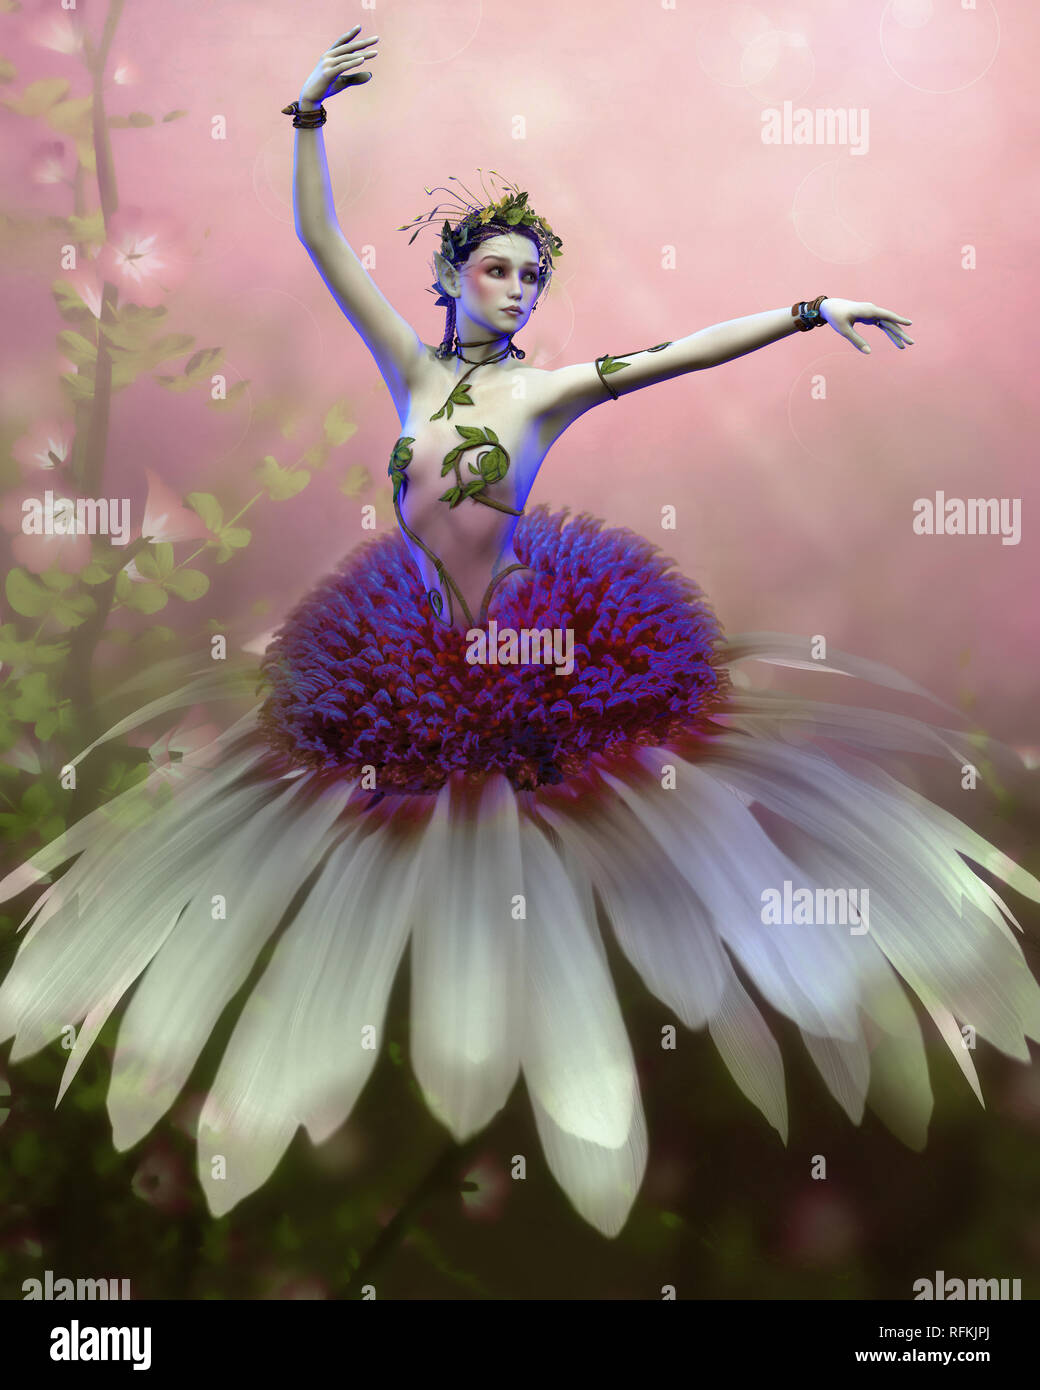 3d computer graphics of a dancing flower fairy Stock Photo